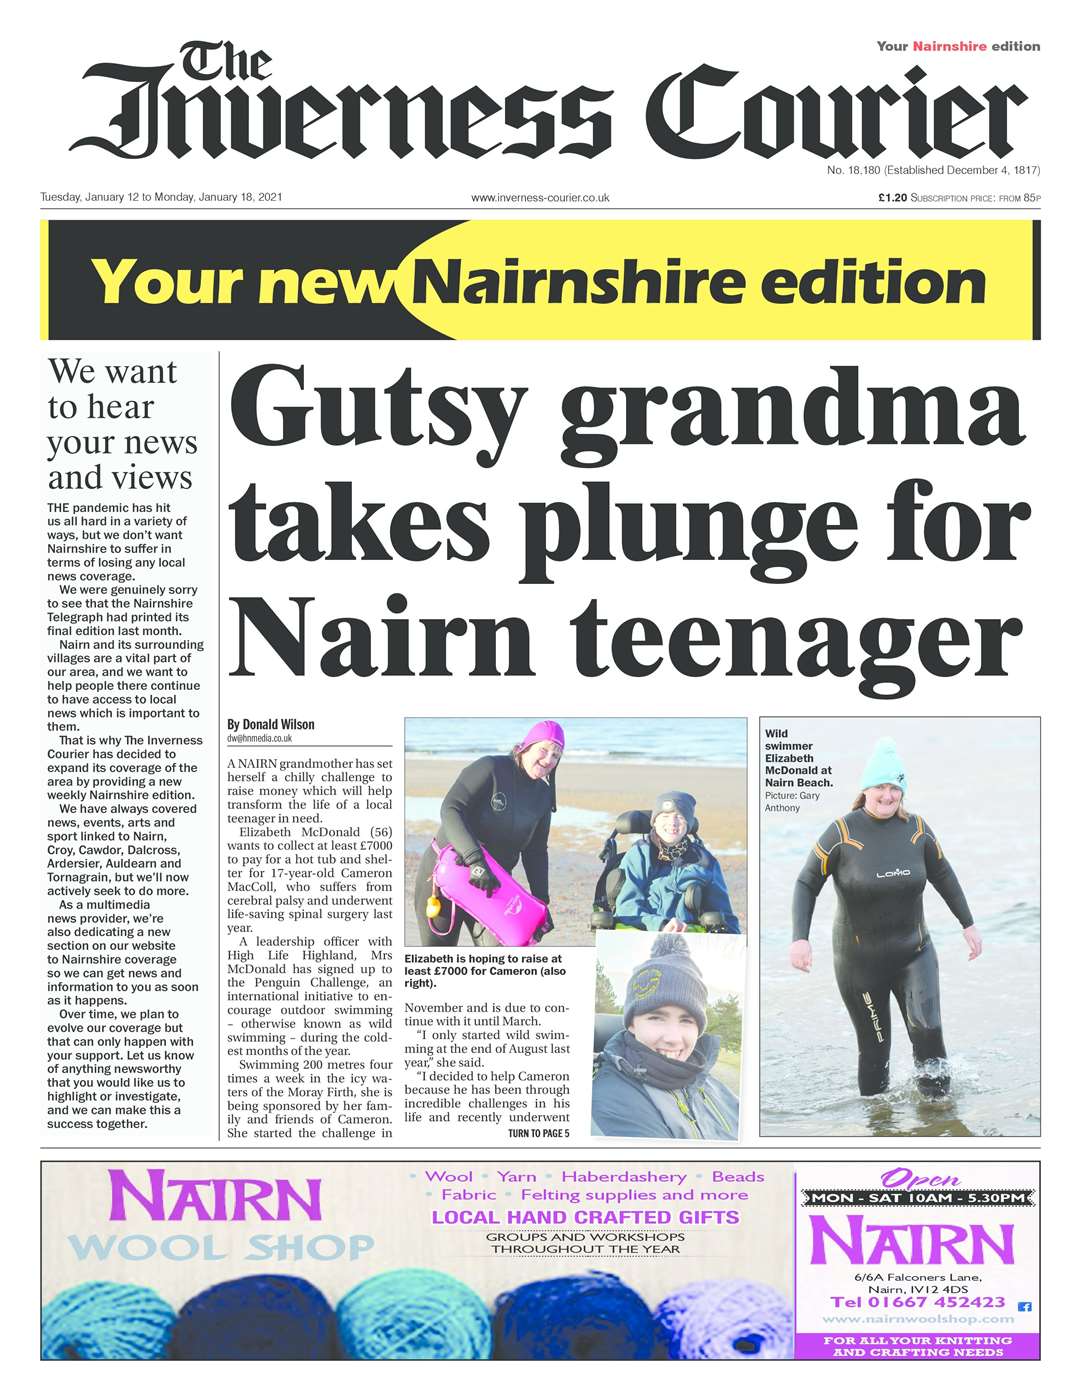 front page of the new Nairn edition of The Inverness Courier